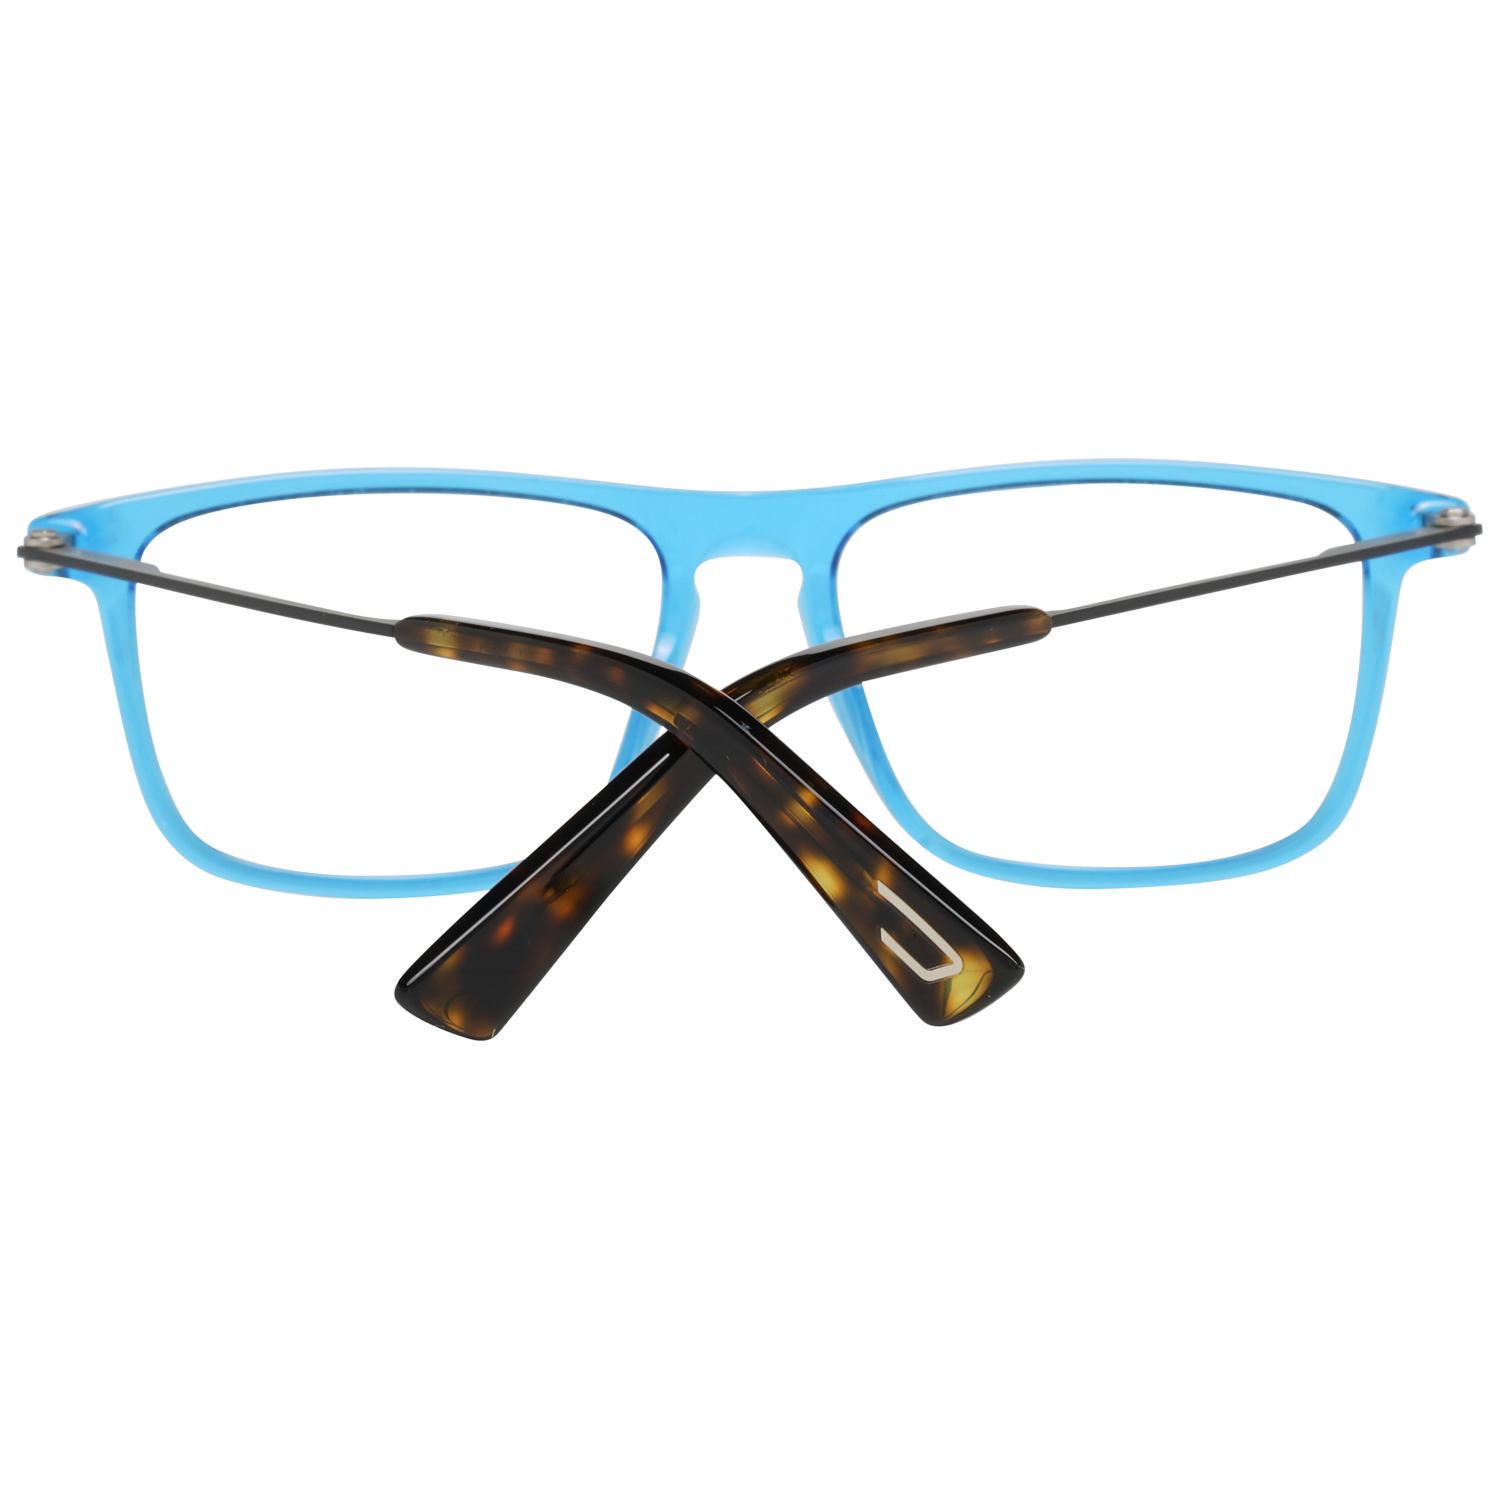 GenderMenMain colorBlueFrame colorBlueFrame materialMetal & PlasticSize54-16-145Lenses width54mmLenses heigth40mmBridge length16mmFrame width140mmTemple length145mmShipment includesCase, Cleaning clothStyleFull-RimSpring hingeNo